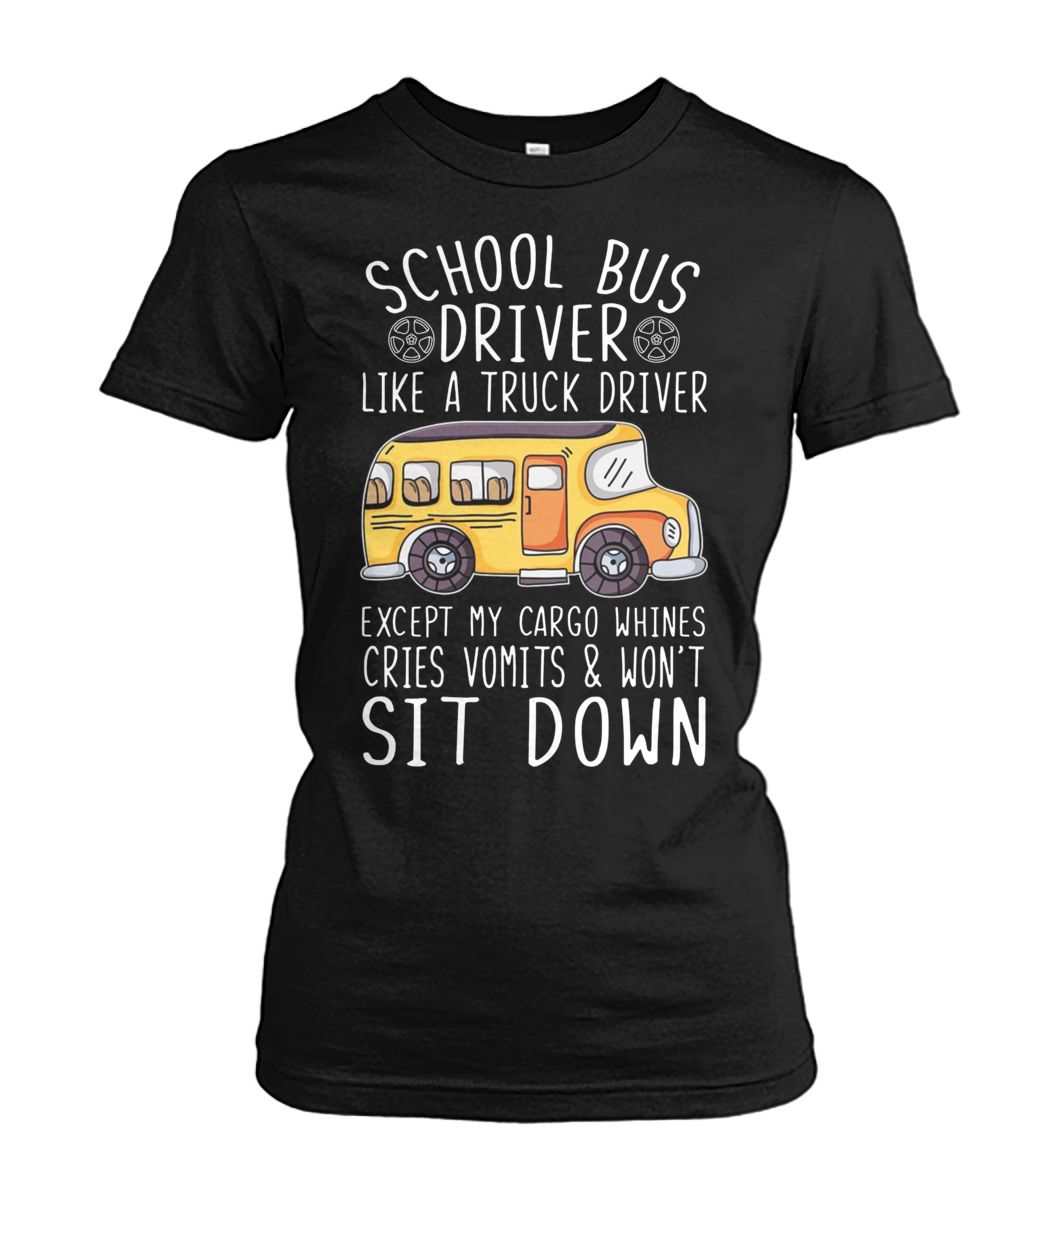 School bus driver I'm like a truck driver except my cargo whines women's crew tee